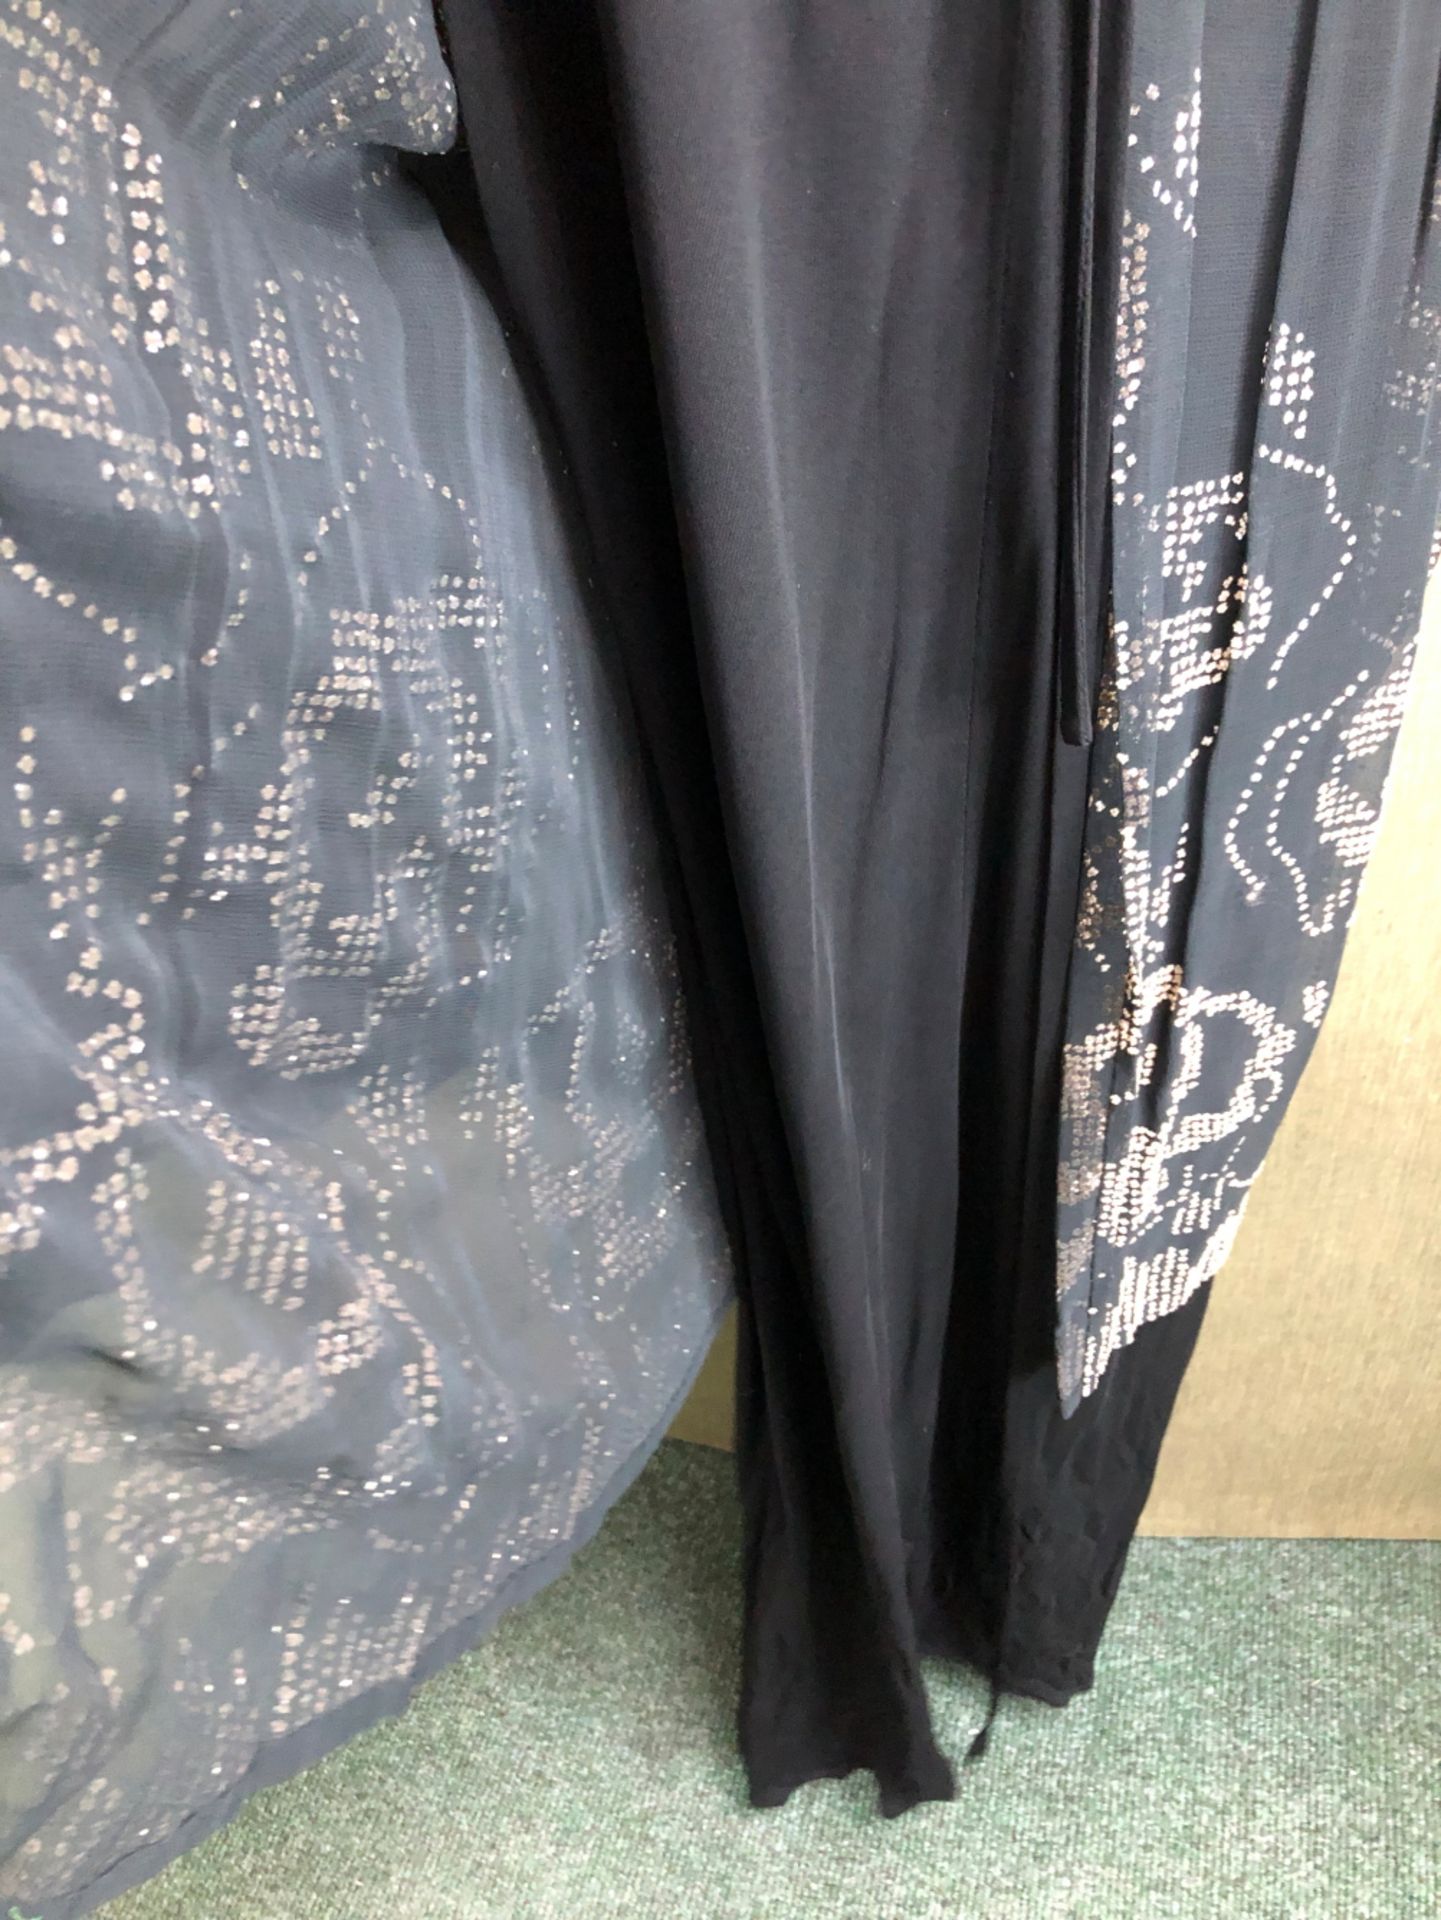 A PAIR OF WIDE LEGGED BLACK TROUSERS BY MARIO BORSATO COUTURE SIZE 44 AND A BLACK MARIO BORSATO - Image 7 of 25